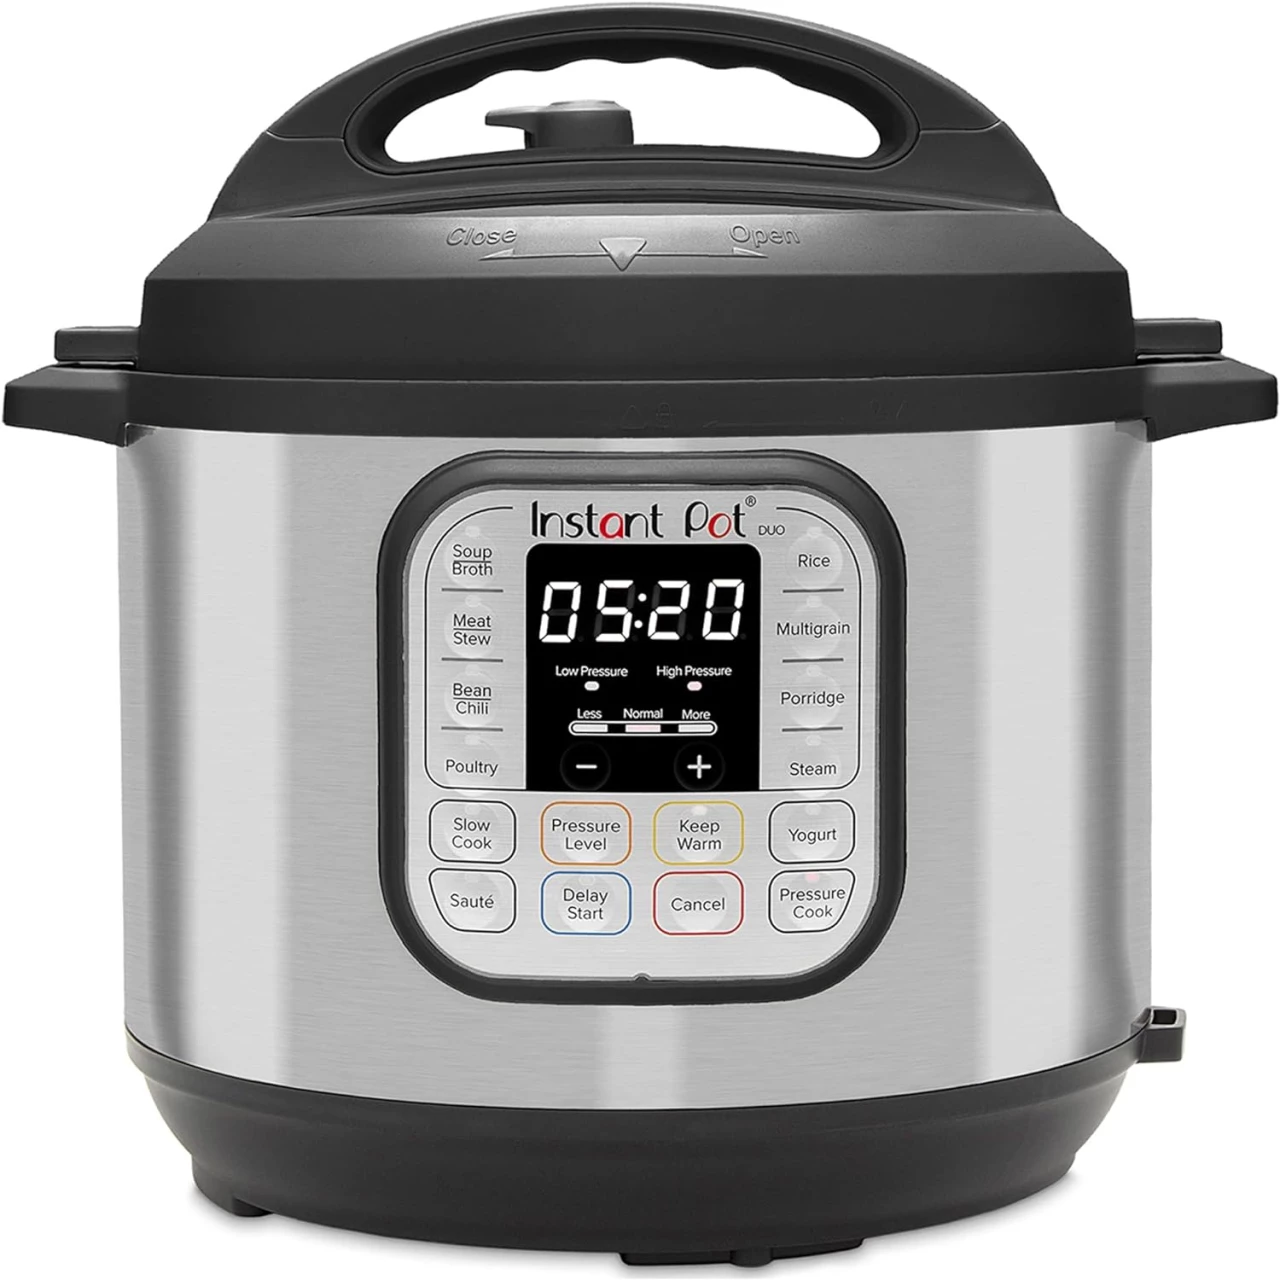 Instant Pot Duo 7-in-1 Electric Pressure Cooker, Slow Cooker, Rice Cooker, Steamer, Sauté, Yogurt Maker, Warmer &amp; Sterilizer, Includes App With Over 800 Recipes, Stainless Steel, 6 Quart